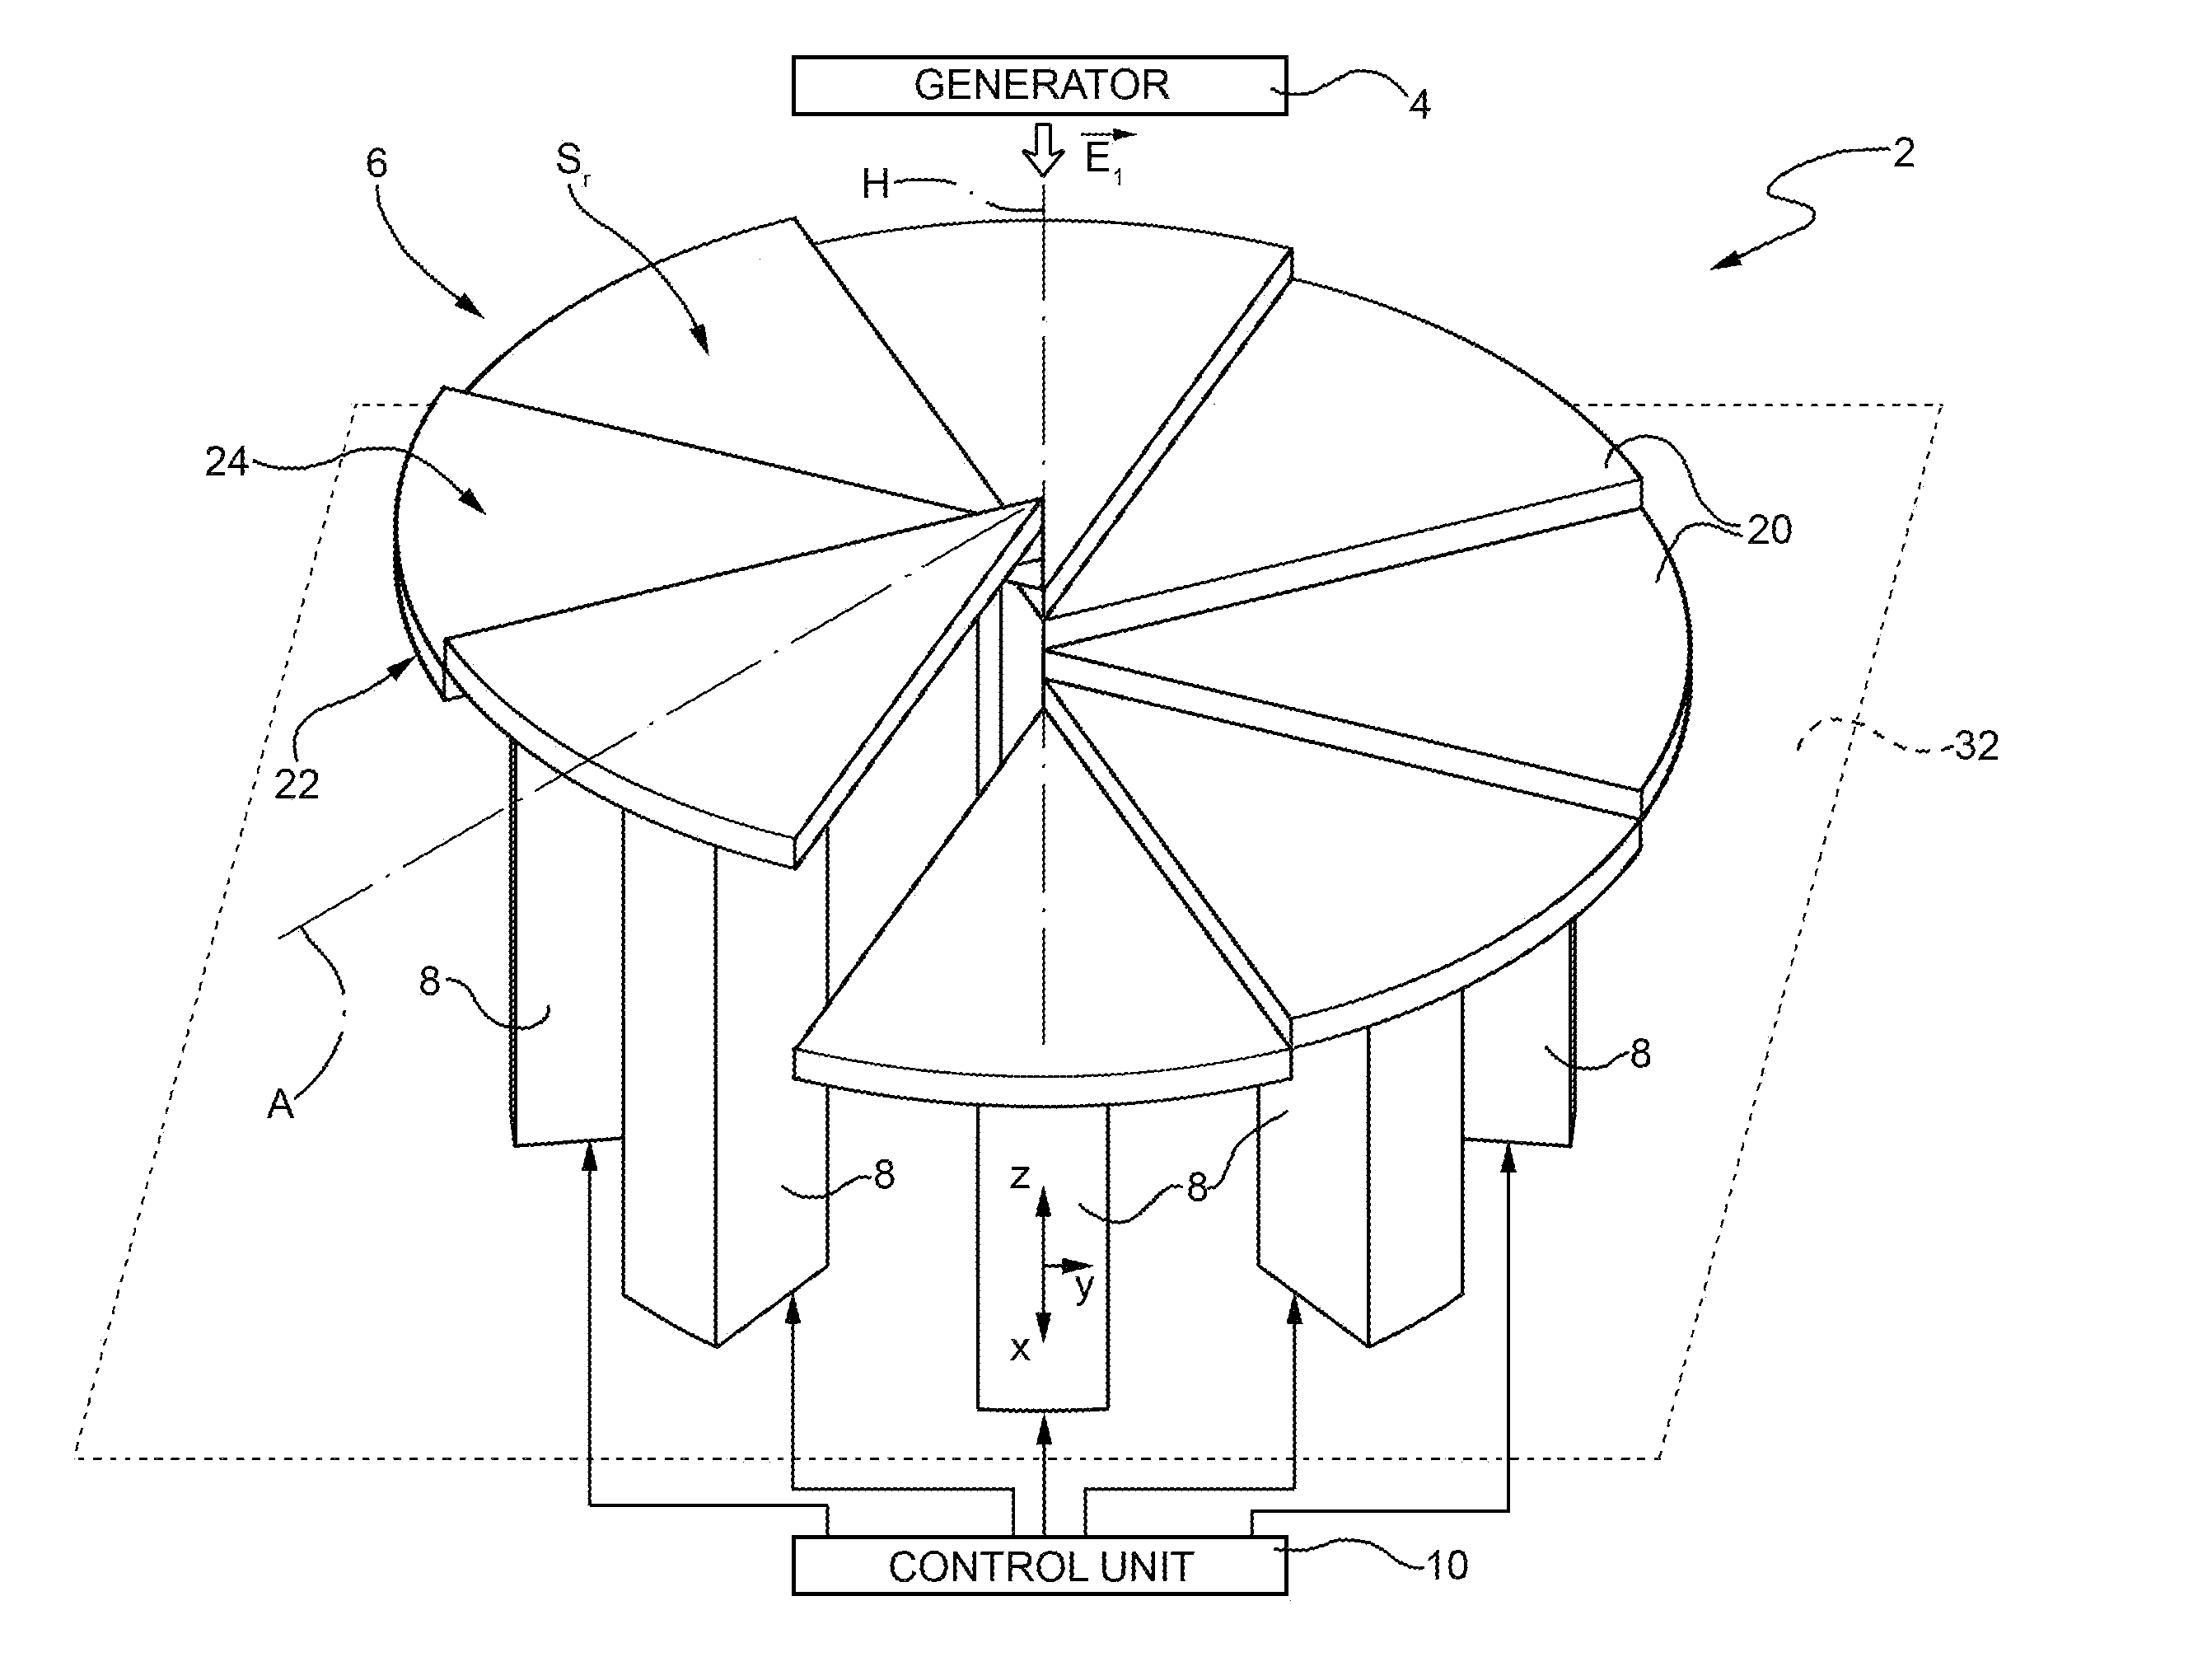 Height Adjustable Phase Plate for Generating Optical Vortices